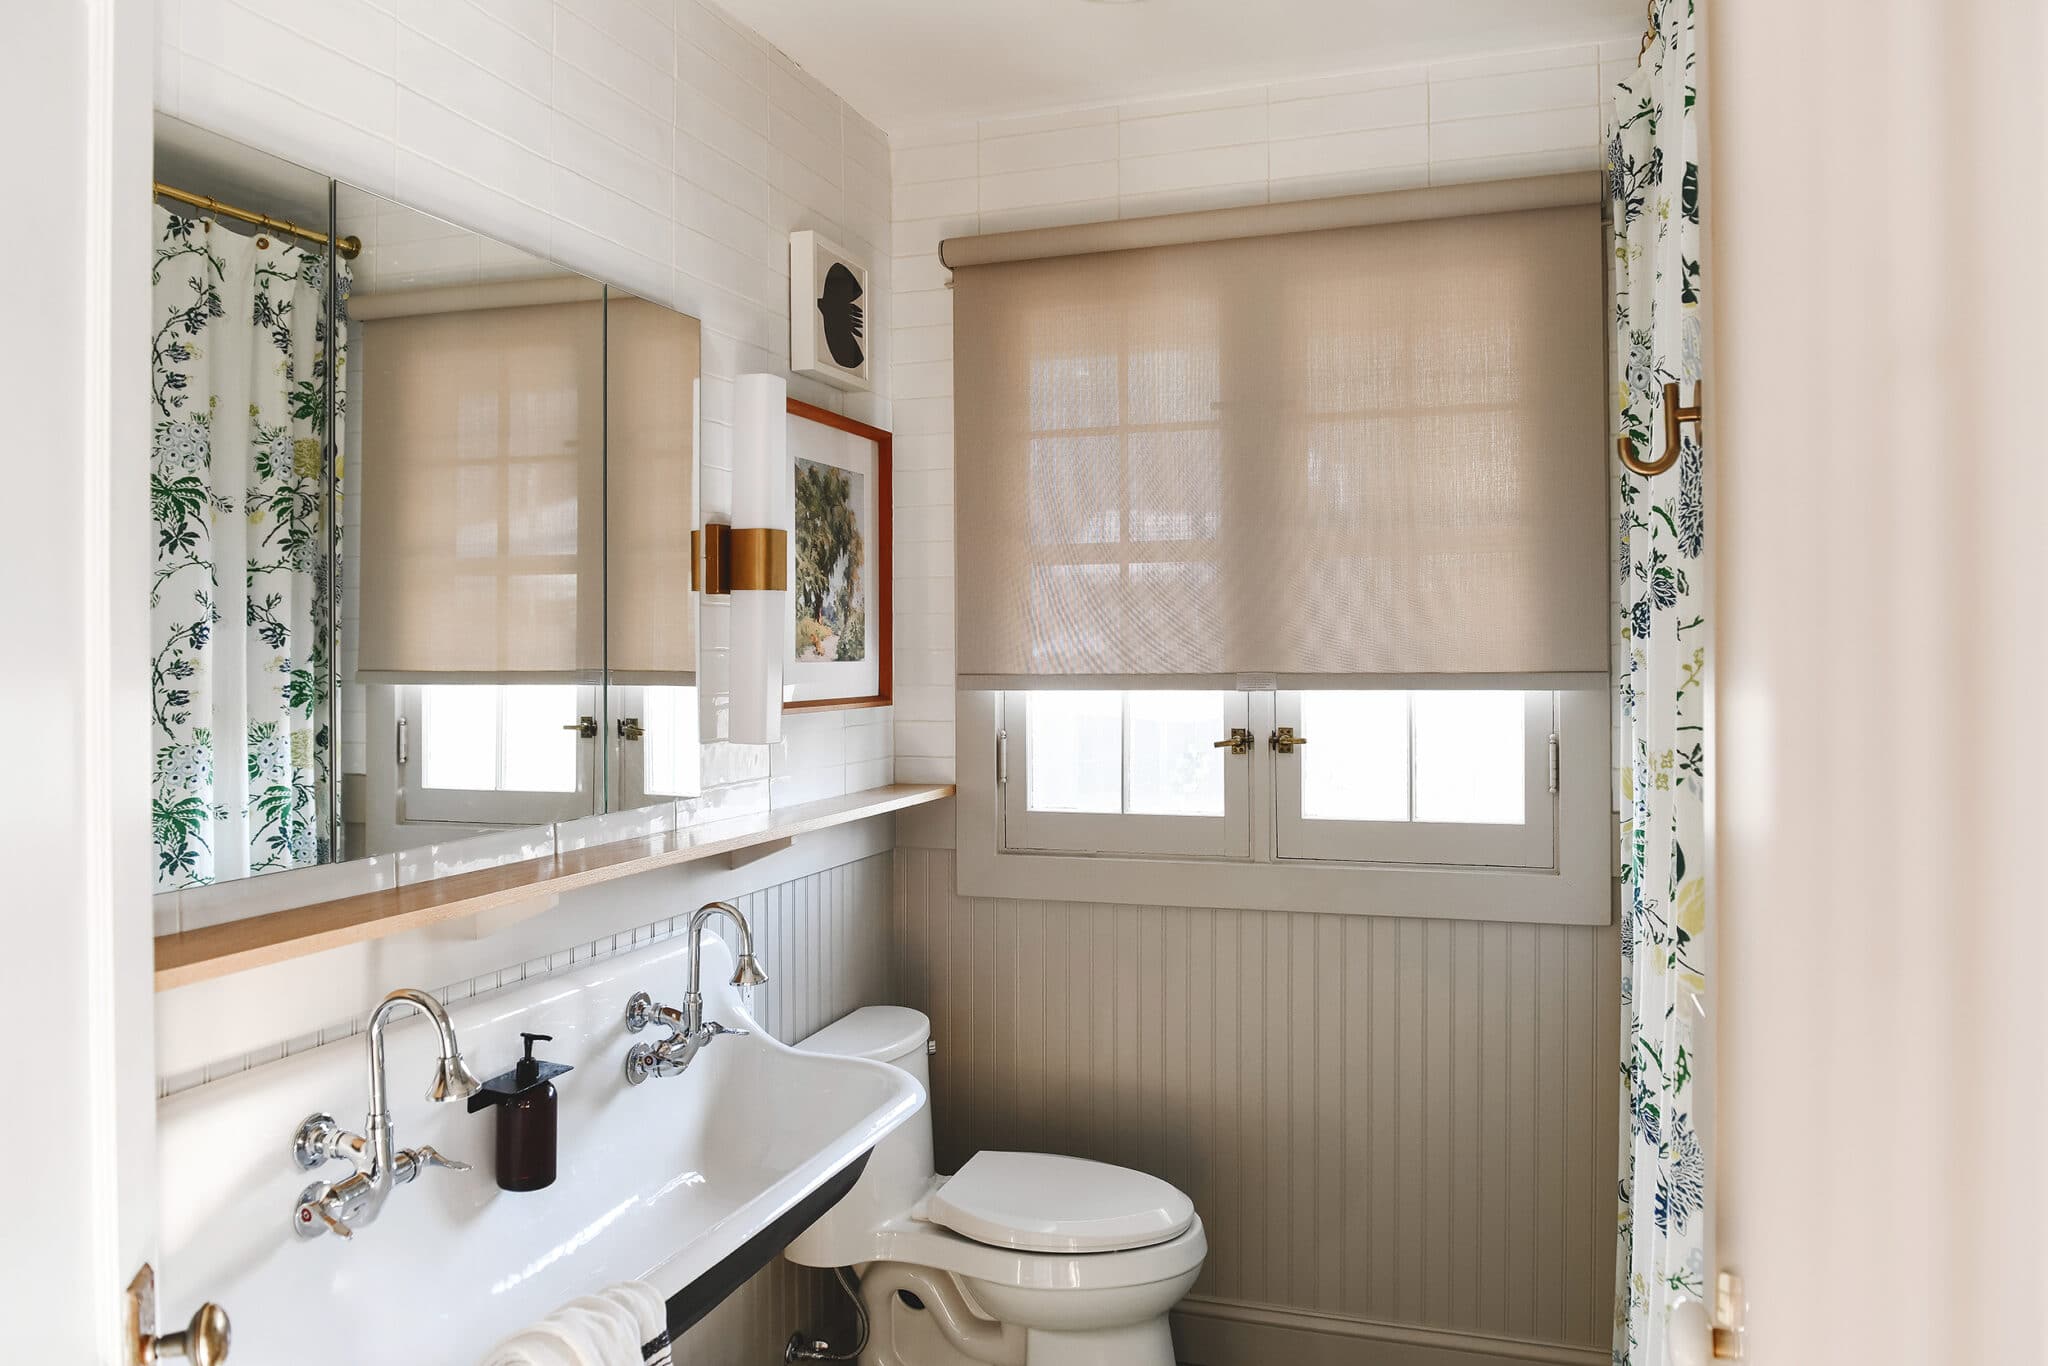 The solar shade in the bathroom matches the trim color more perfectly than we could have imagined!